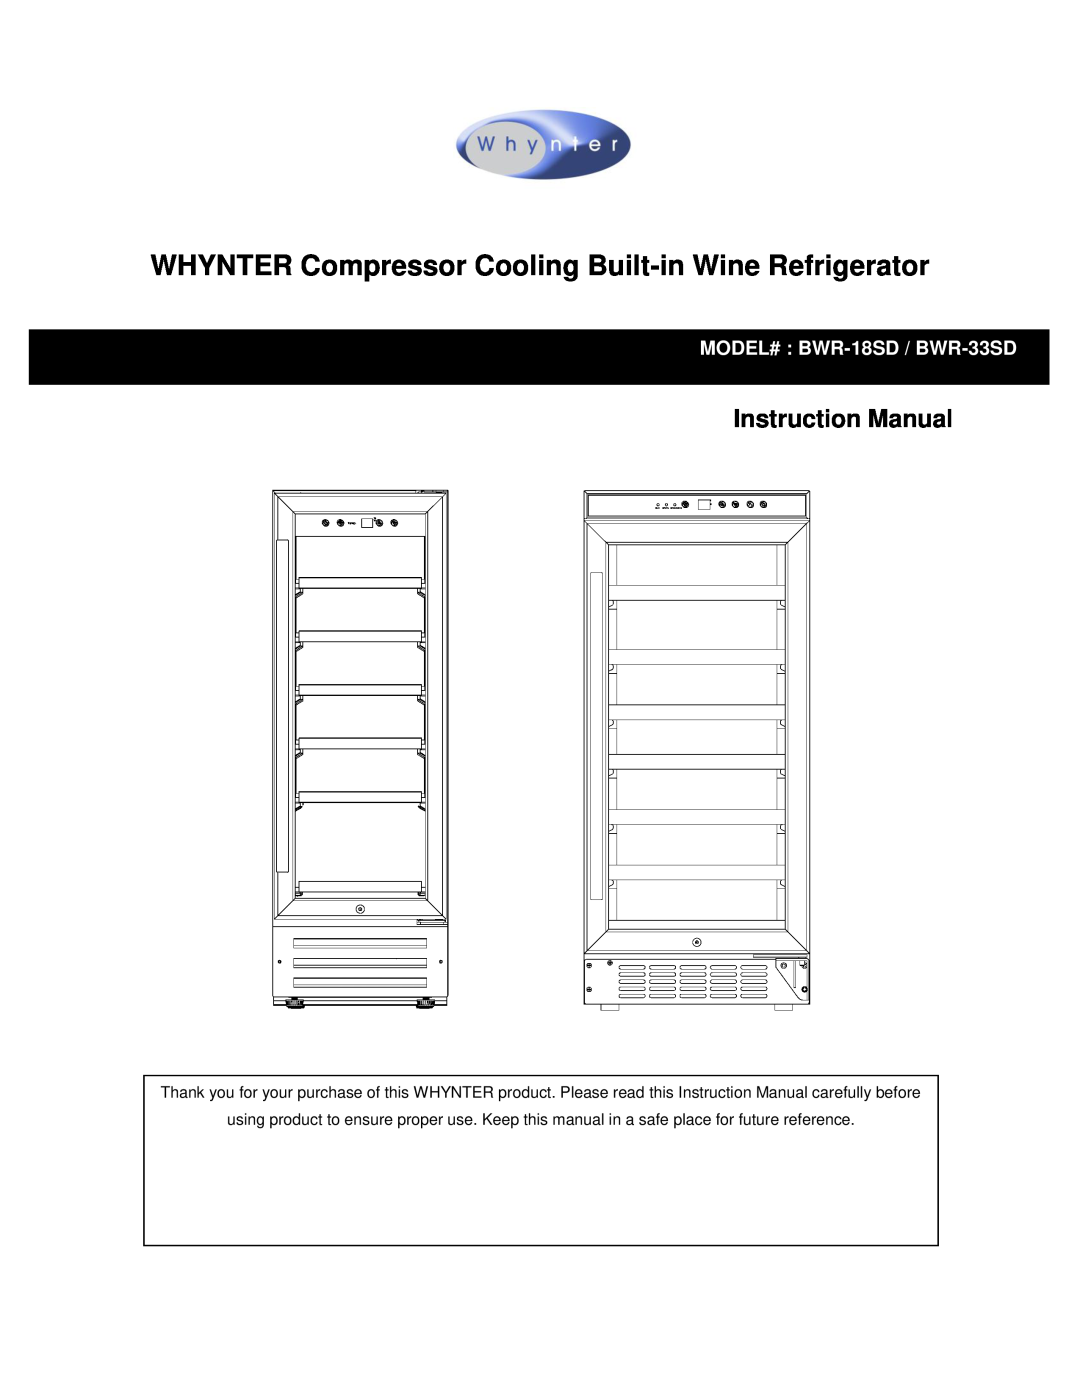 Whynter BWR-33SD, BWR-18SD instruction manual WHYNTER Compressor Cooling Built-in Wine Refrigerator, Instruction Manual 